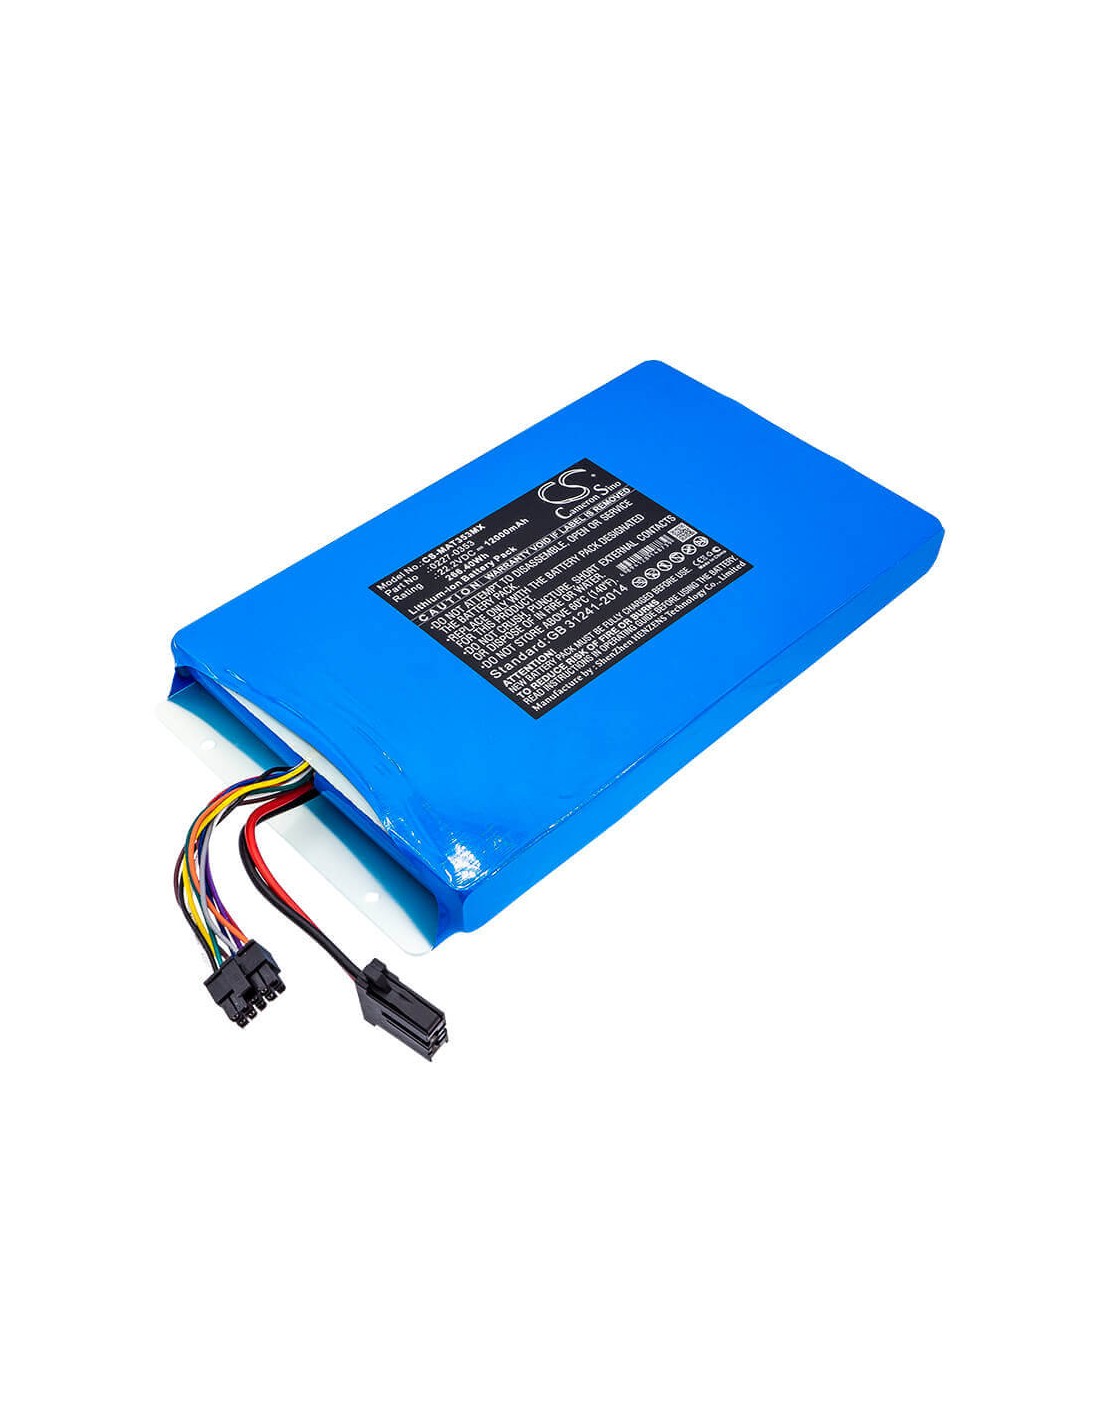 Battery for Maquet, 2270353, 0227-0353, 227040203 22.2V, 12000mAh - 266.40Wh